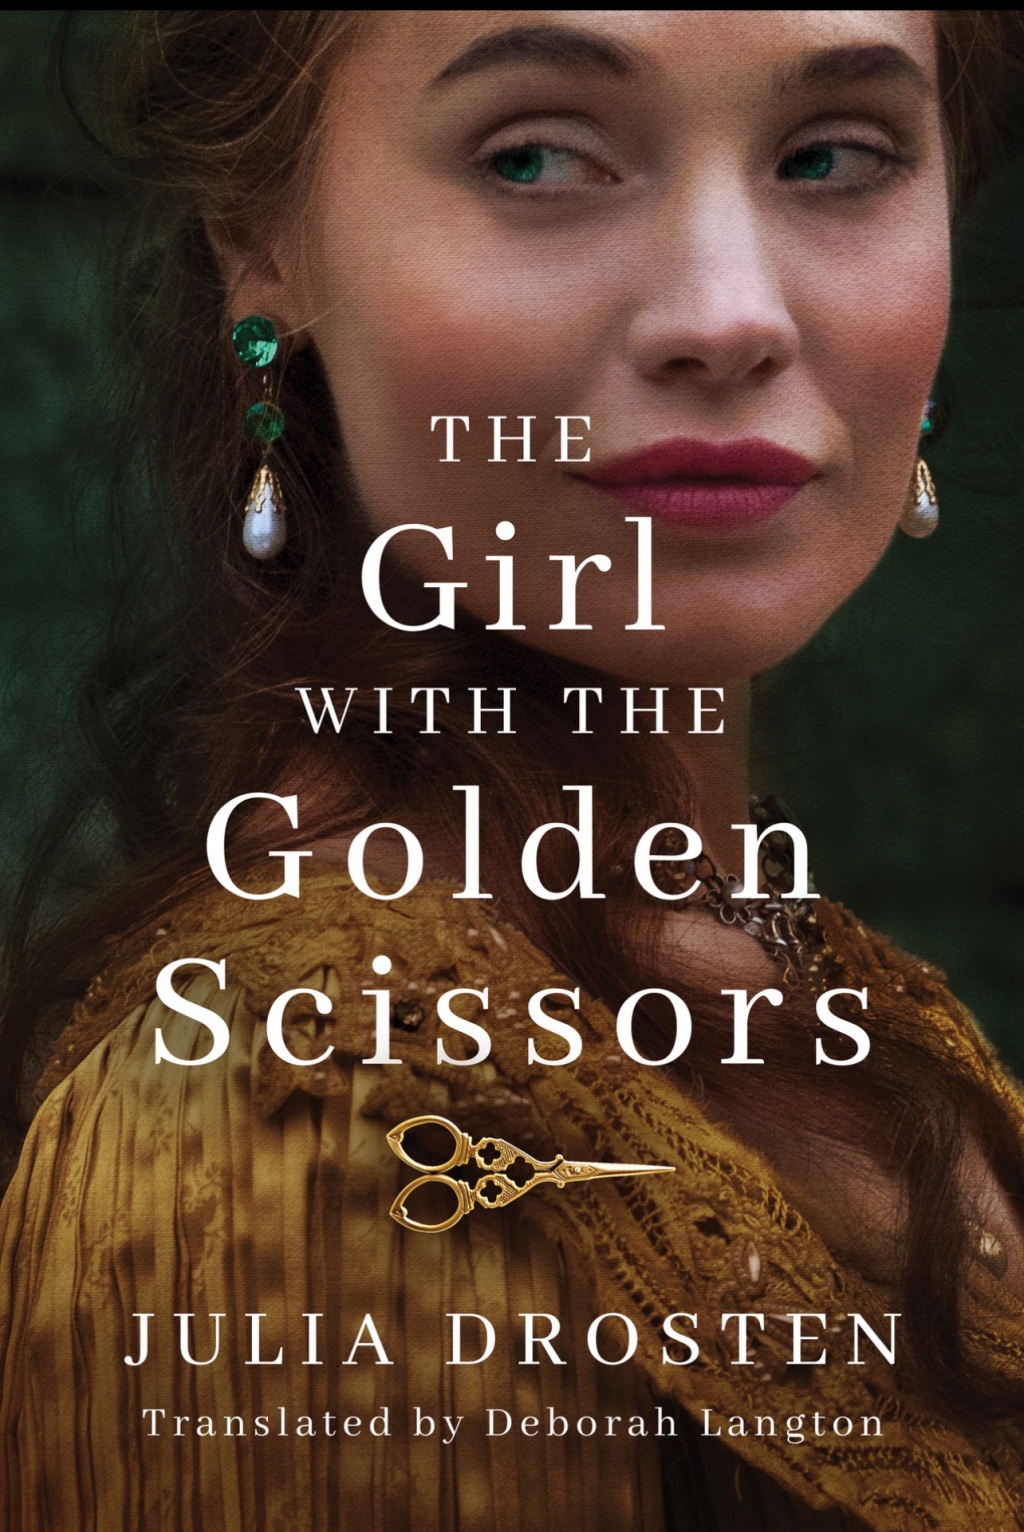 Book Review: The Girl with the Golden Scissors